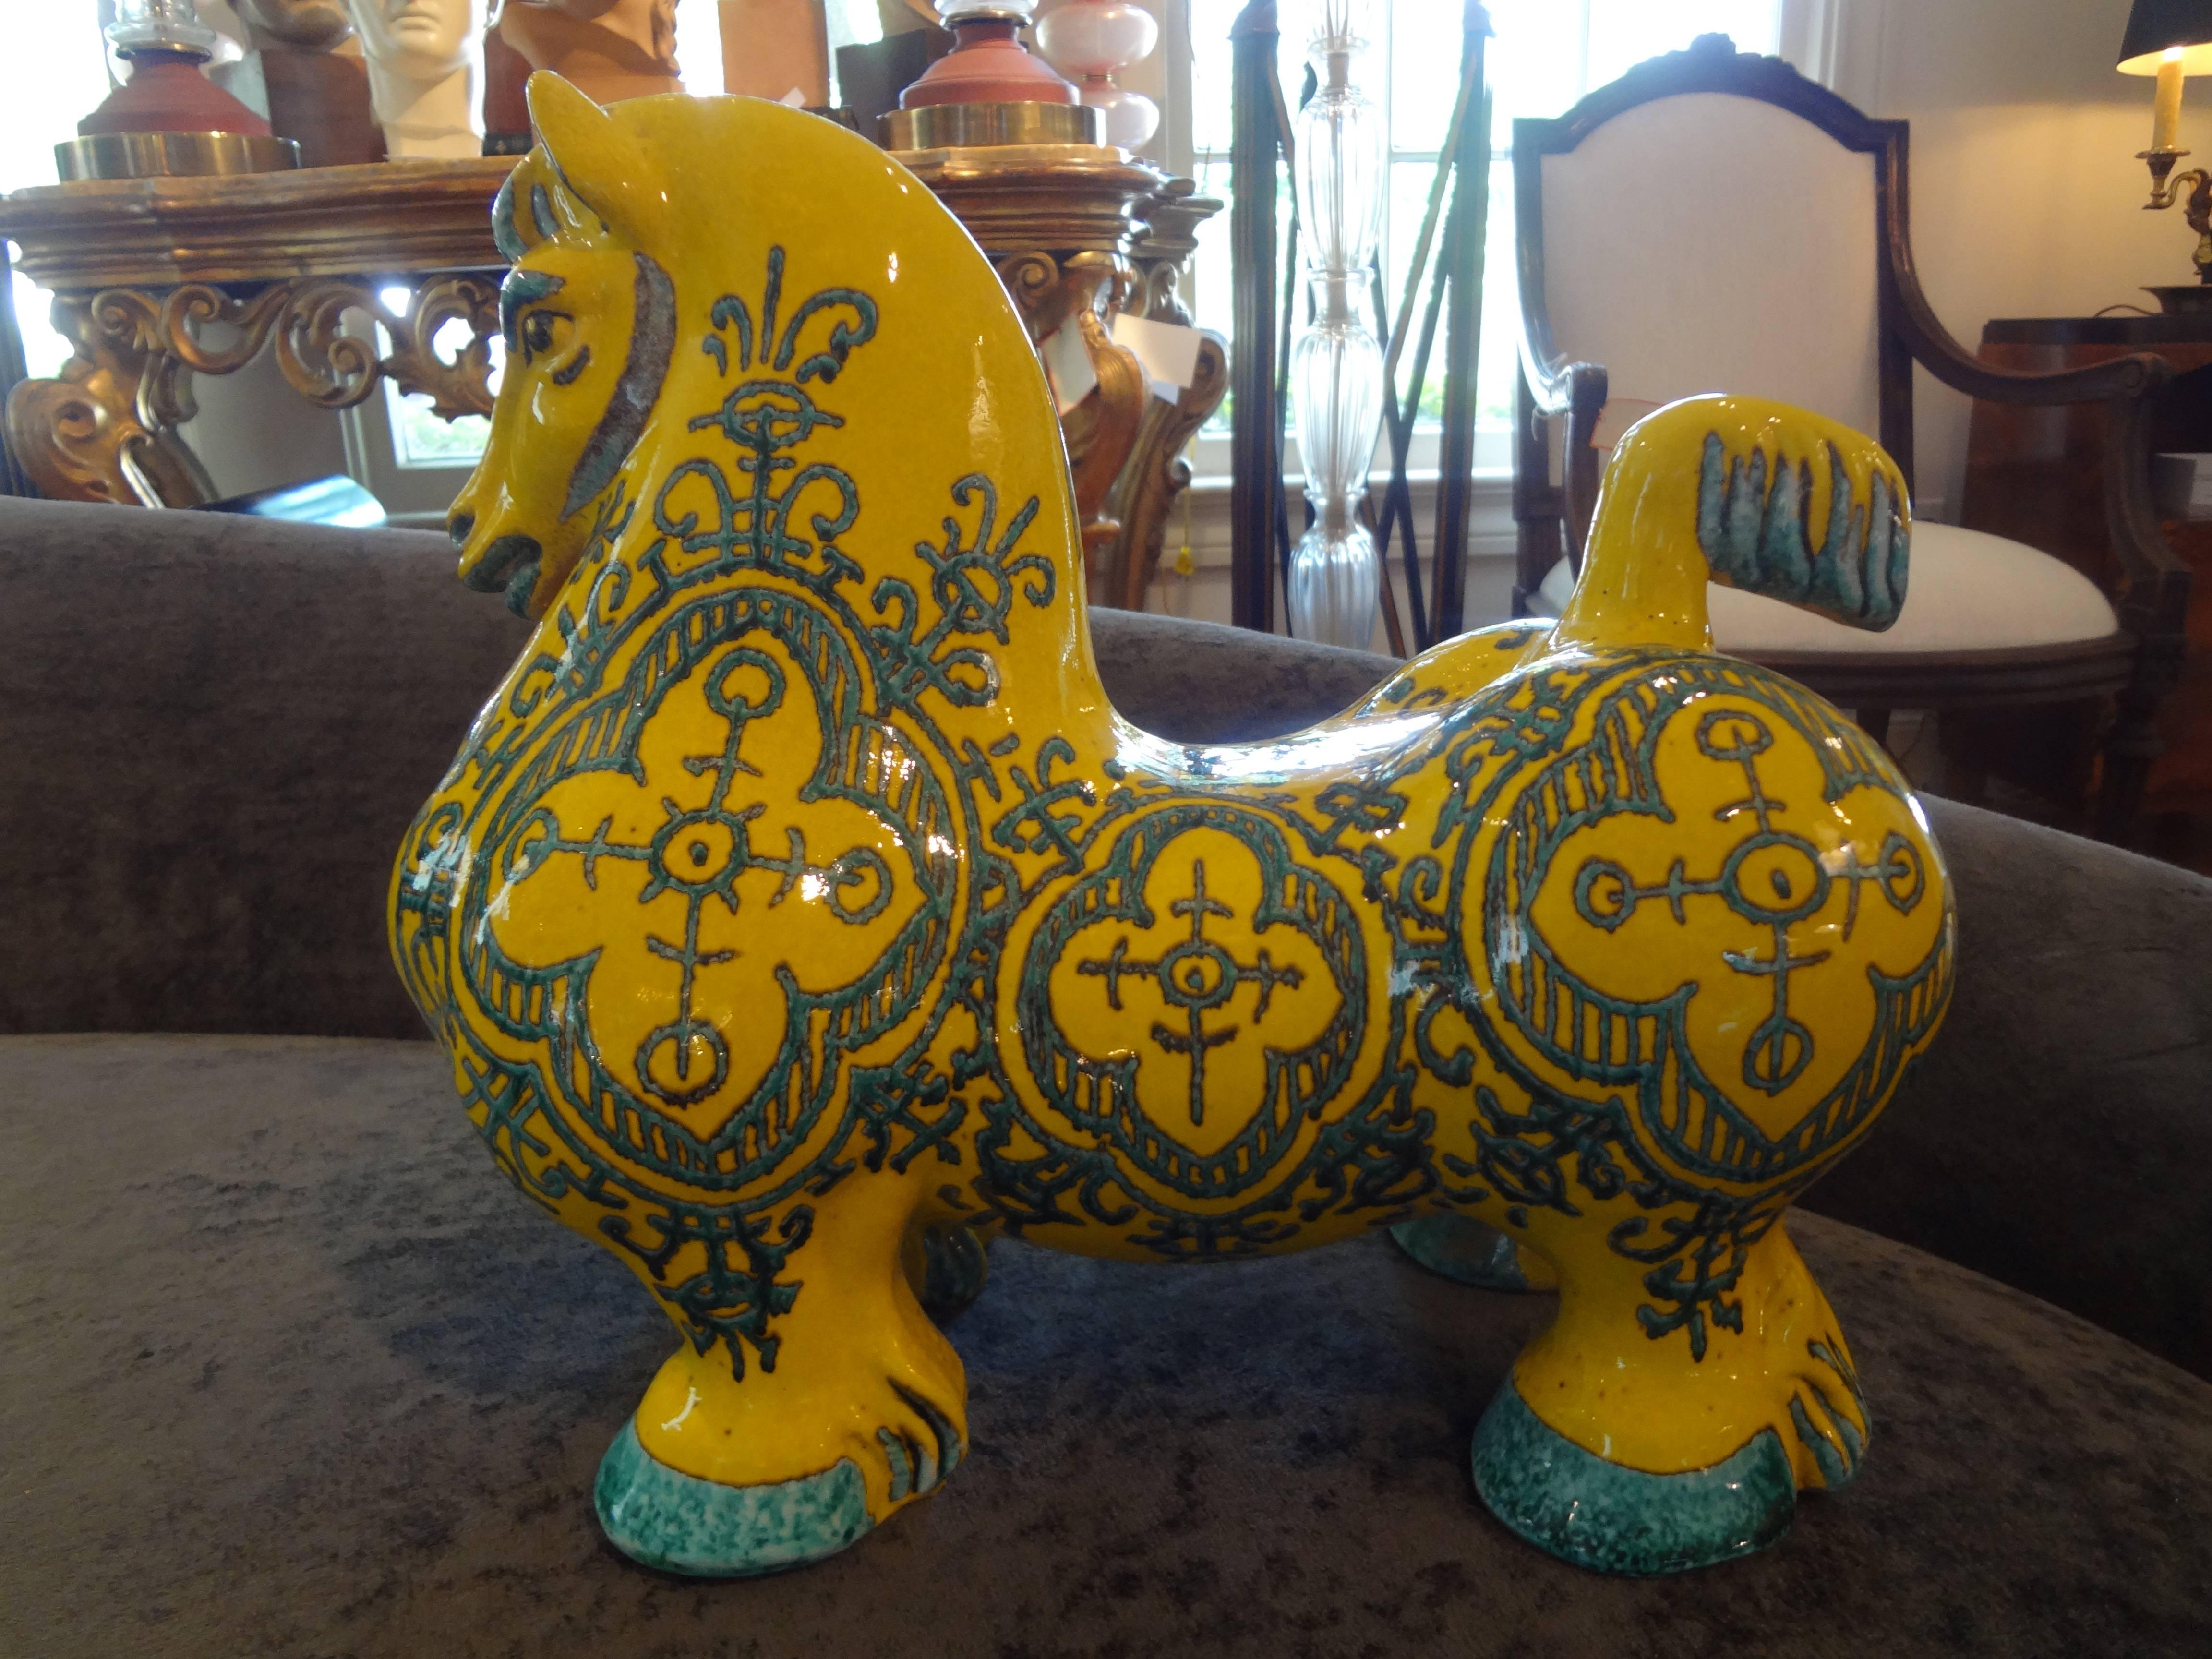 Beautiful Hollywood Regency style Italian glazed terracotta horse sculpture. This unusual Bitossi inspired horse is bright yellow color with turquoise accents. It dates to the 1960s and is marked Italy.